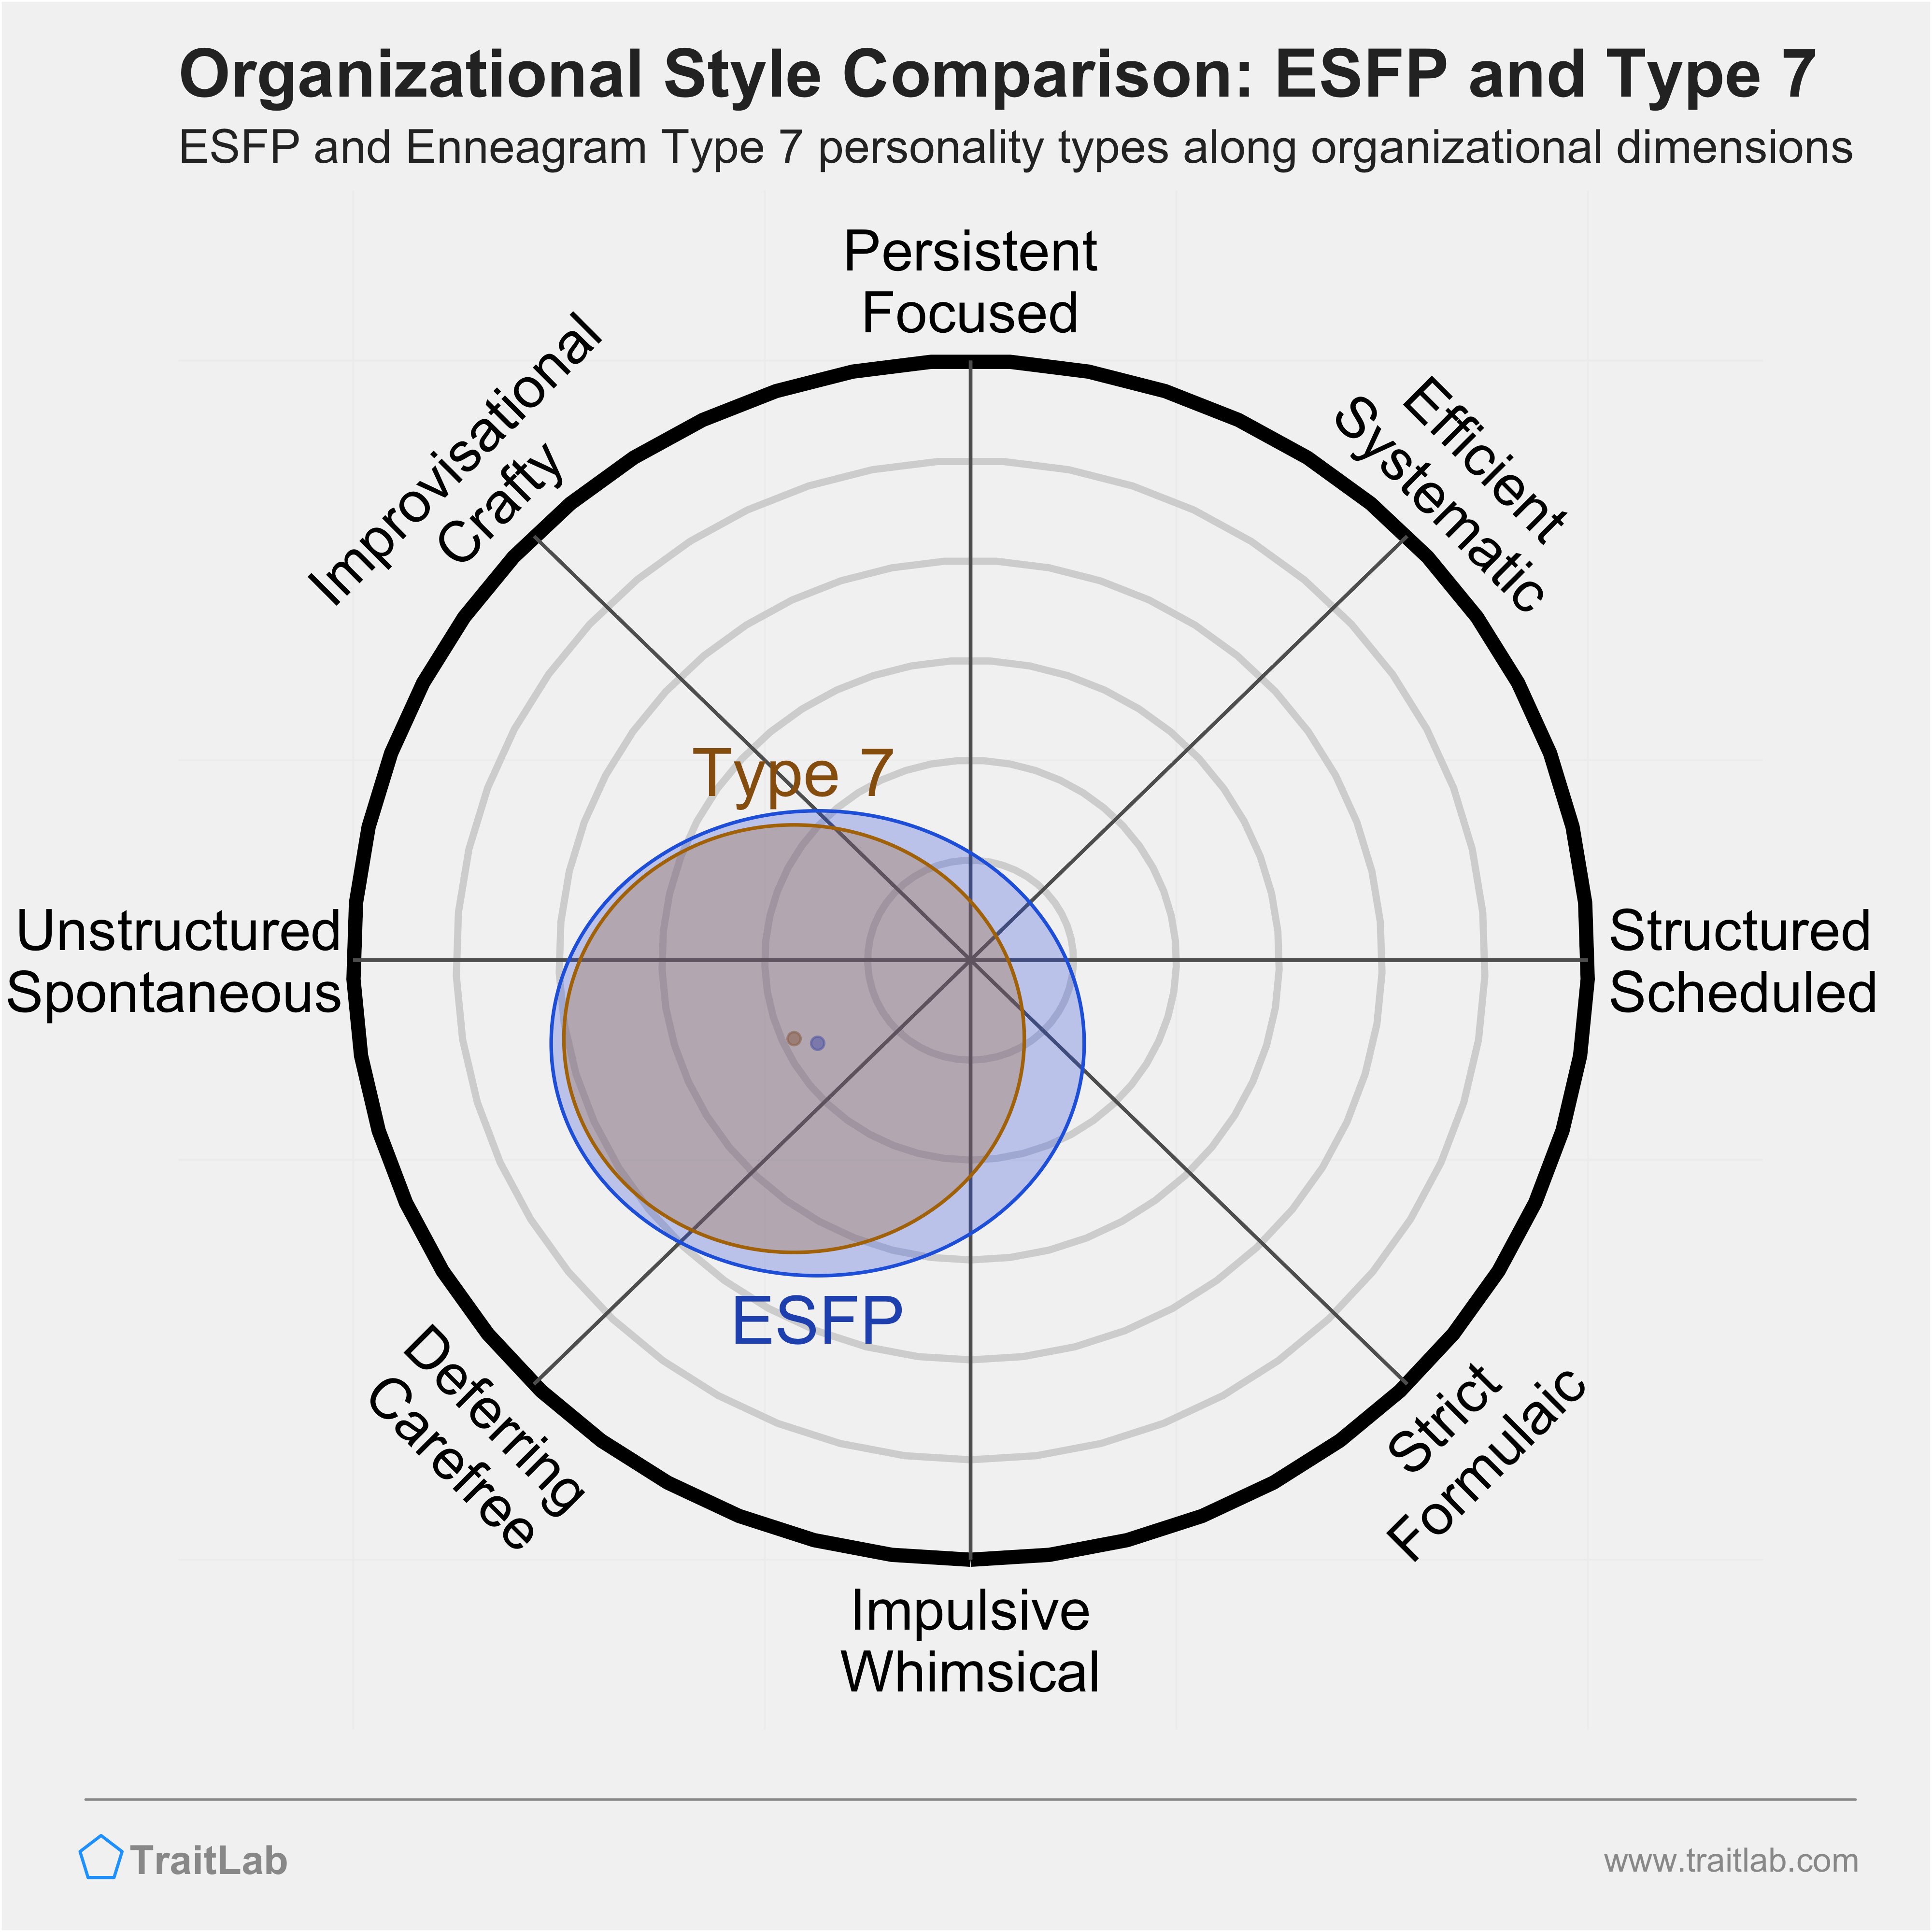 ESFP and Type 7 comparison across organizational dimensions